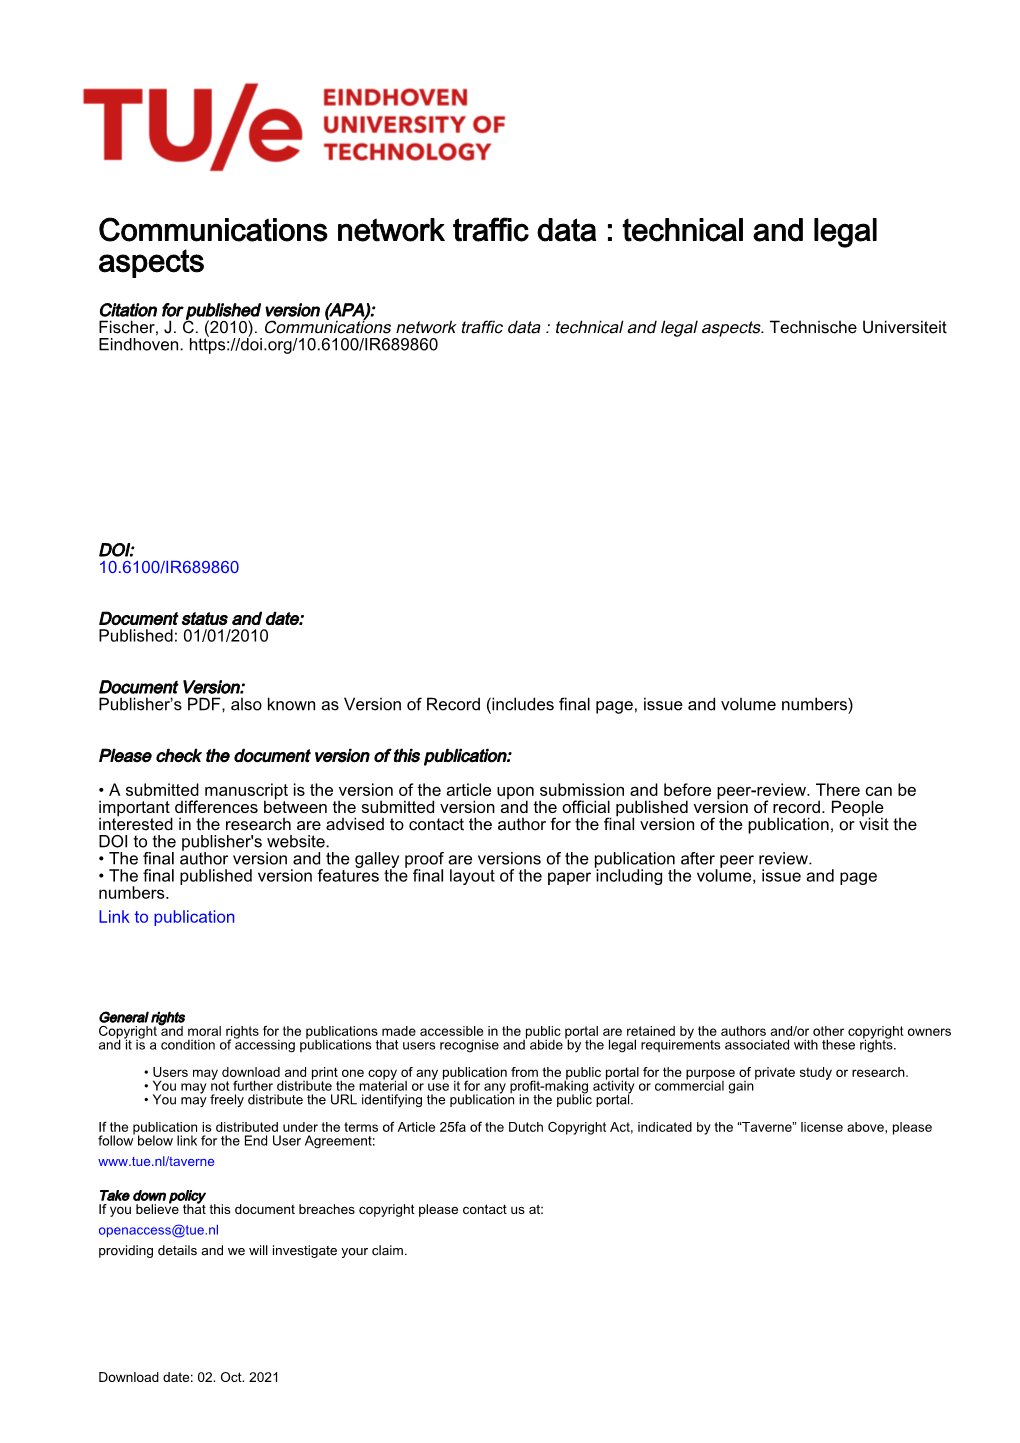 Communications Network Traffic Data : Technical and Legal Aspects